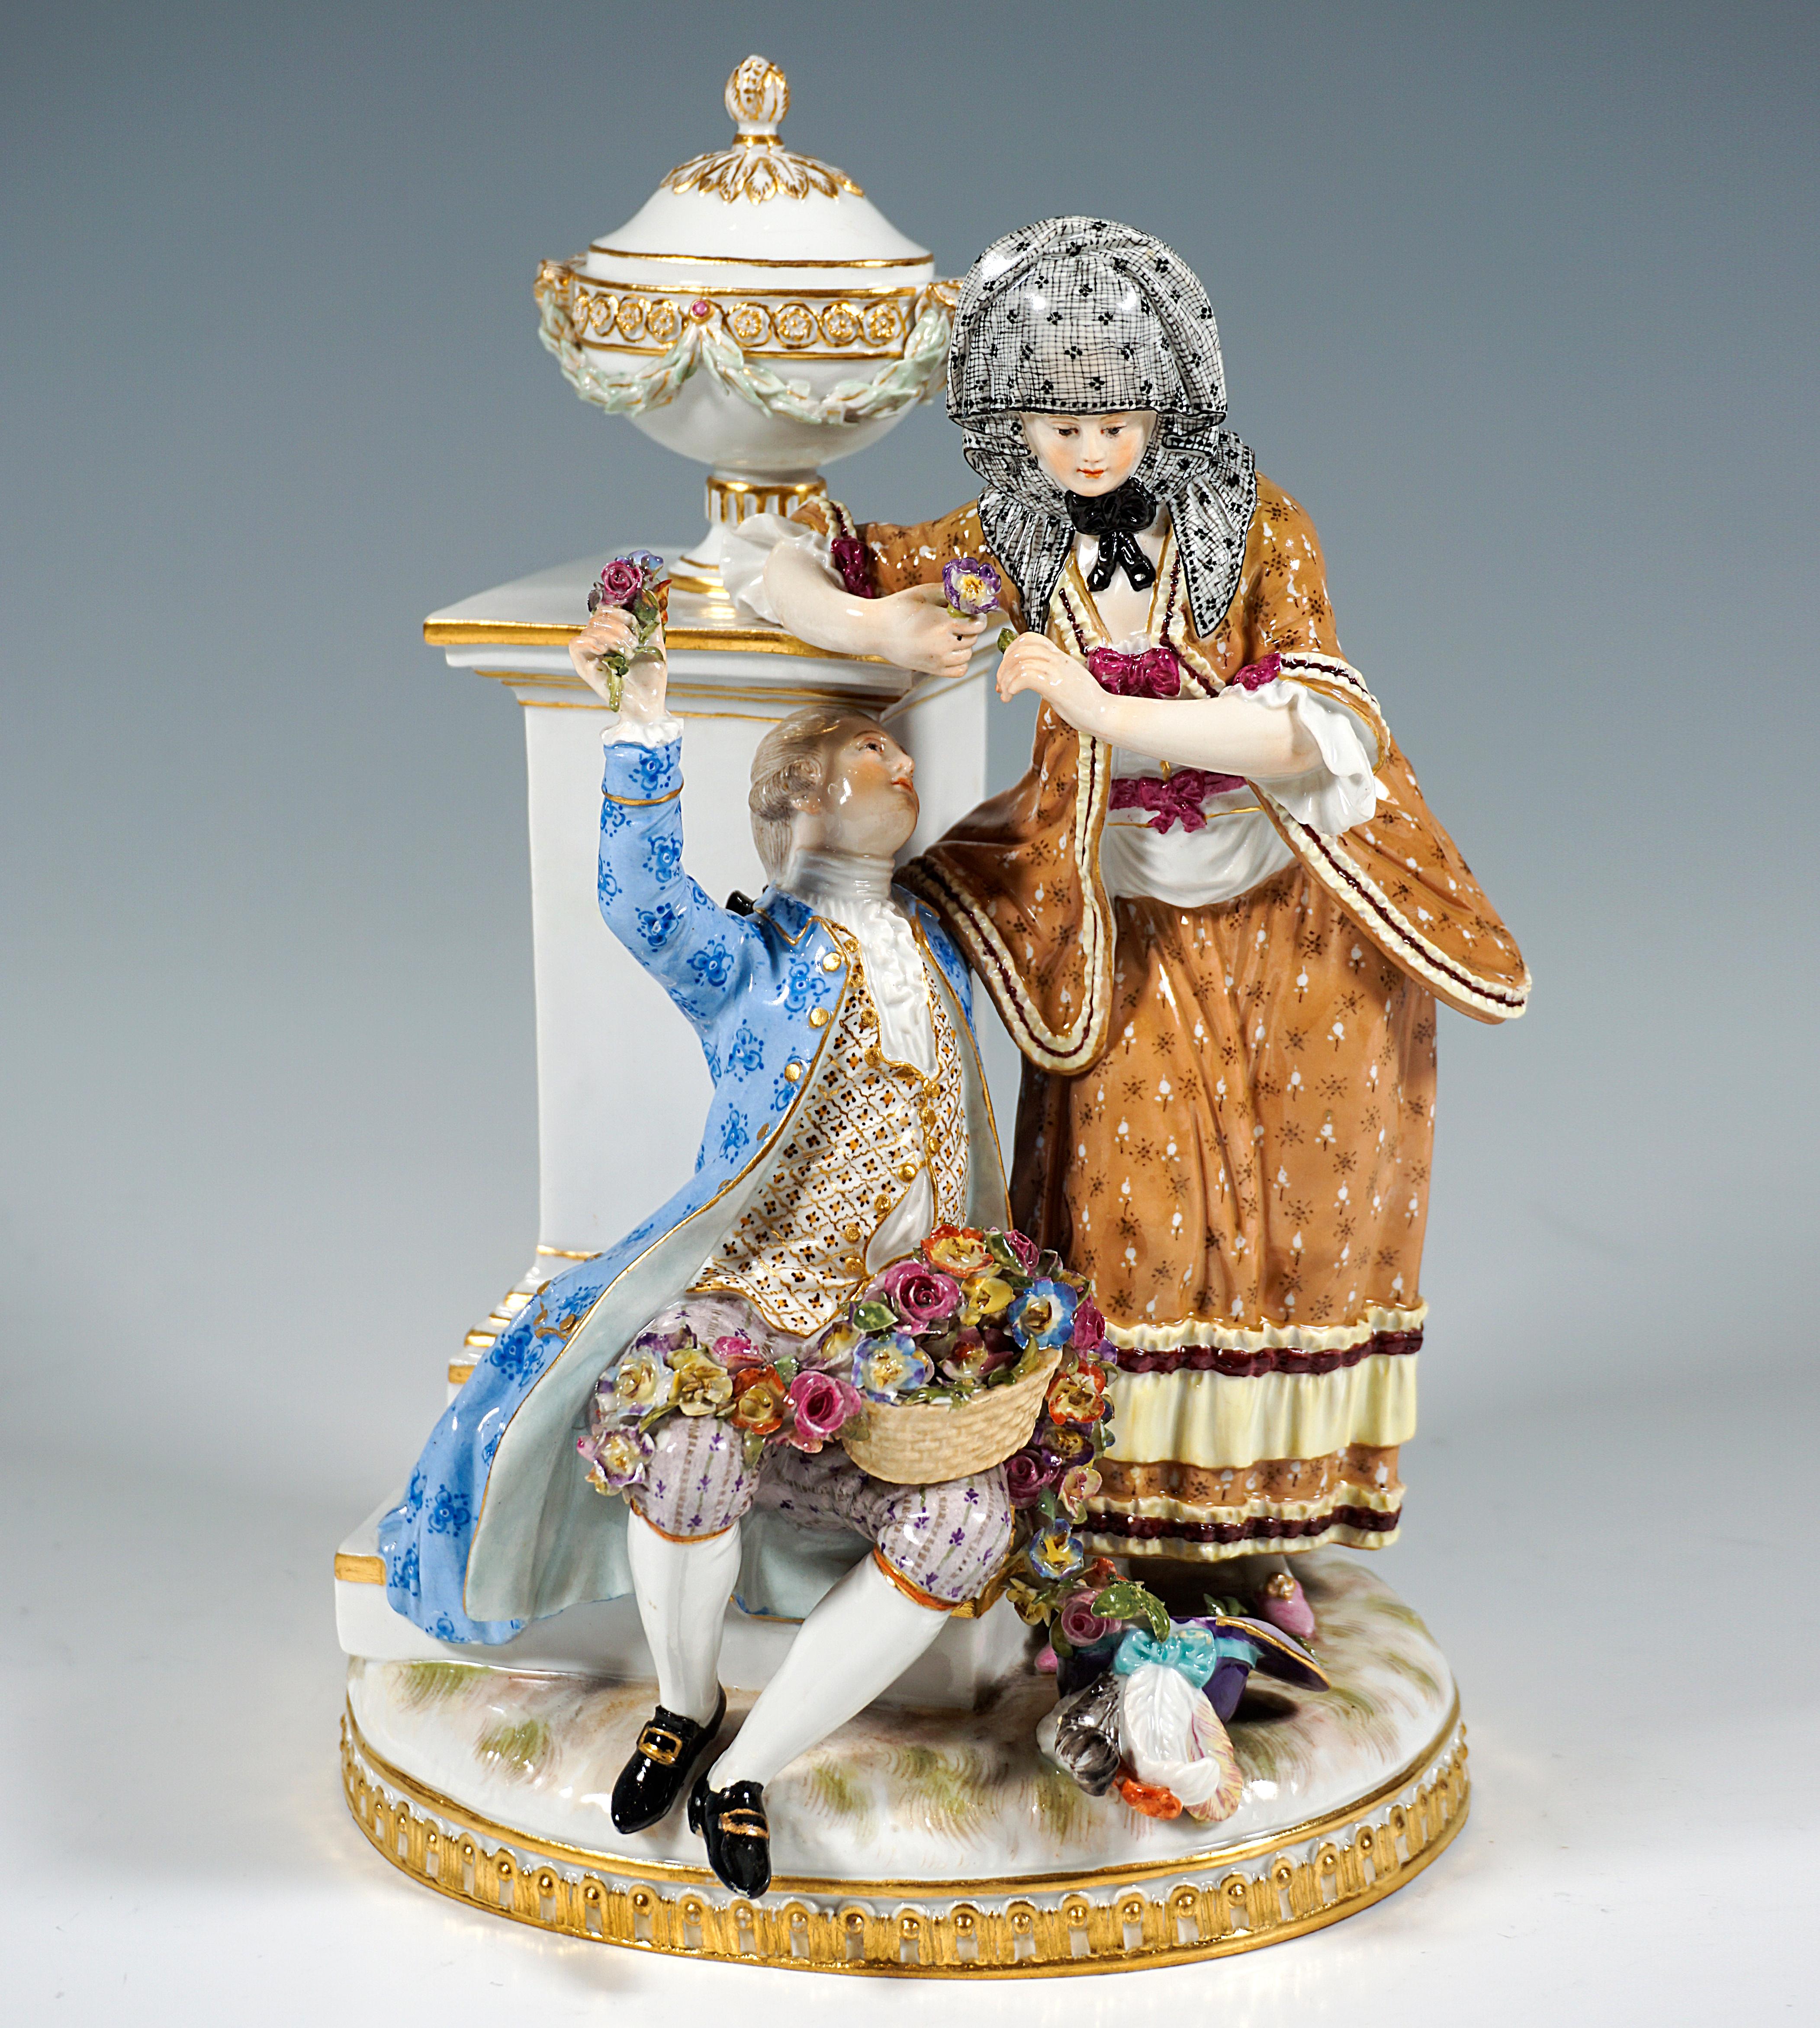 Excellent Rococo love group in splendid clothes in front of ornate column monument: the gallant sitting on the pedestal of the pedestal at the feet of his beloved, on his lap a basket full of flowers and a flower garland, a sign of his exuberant